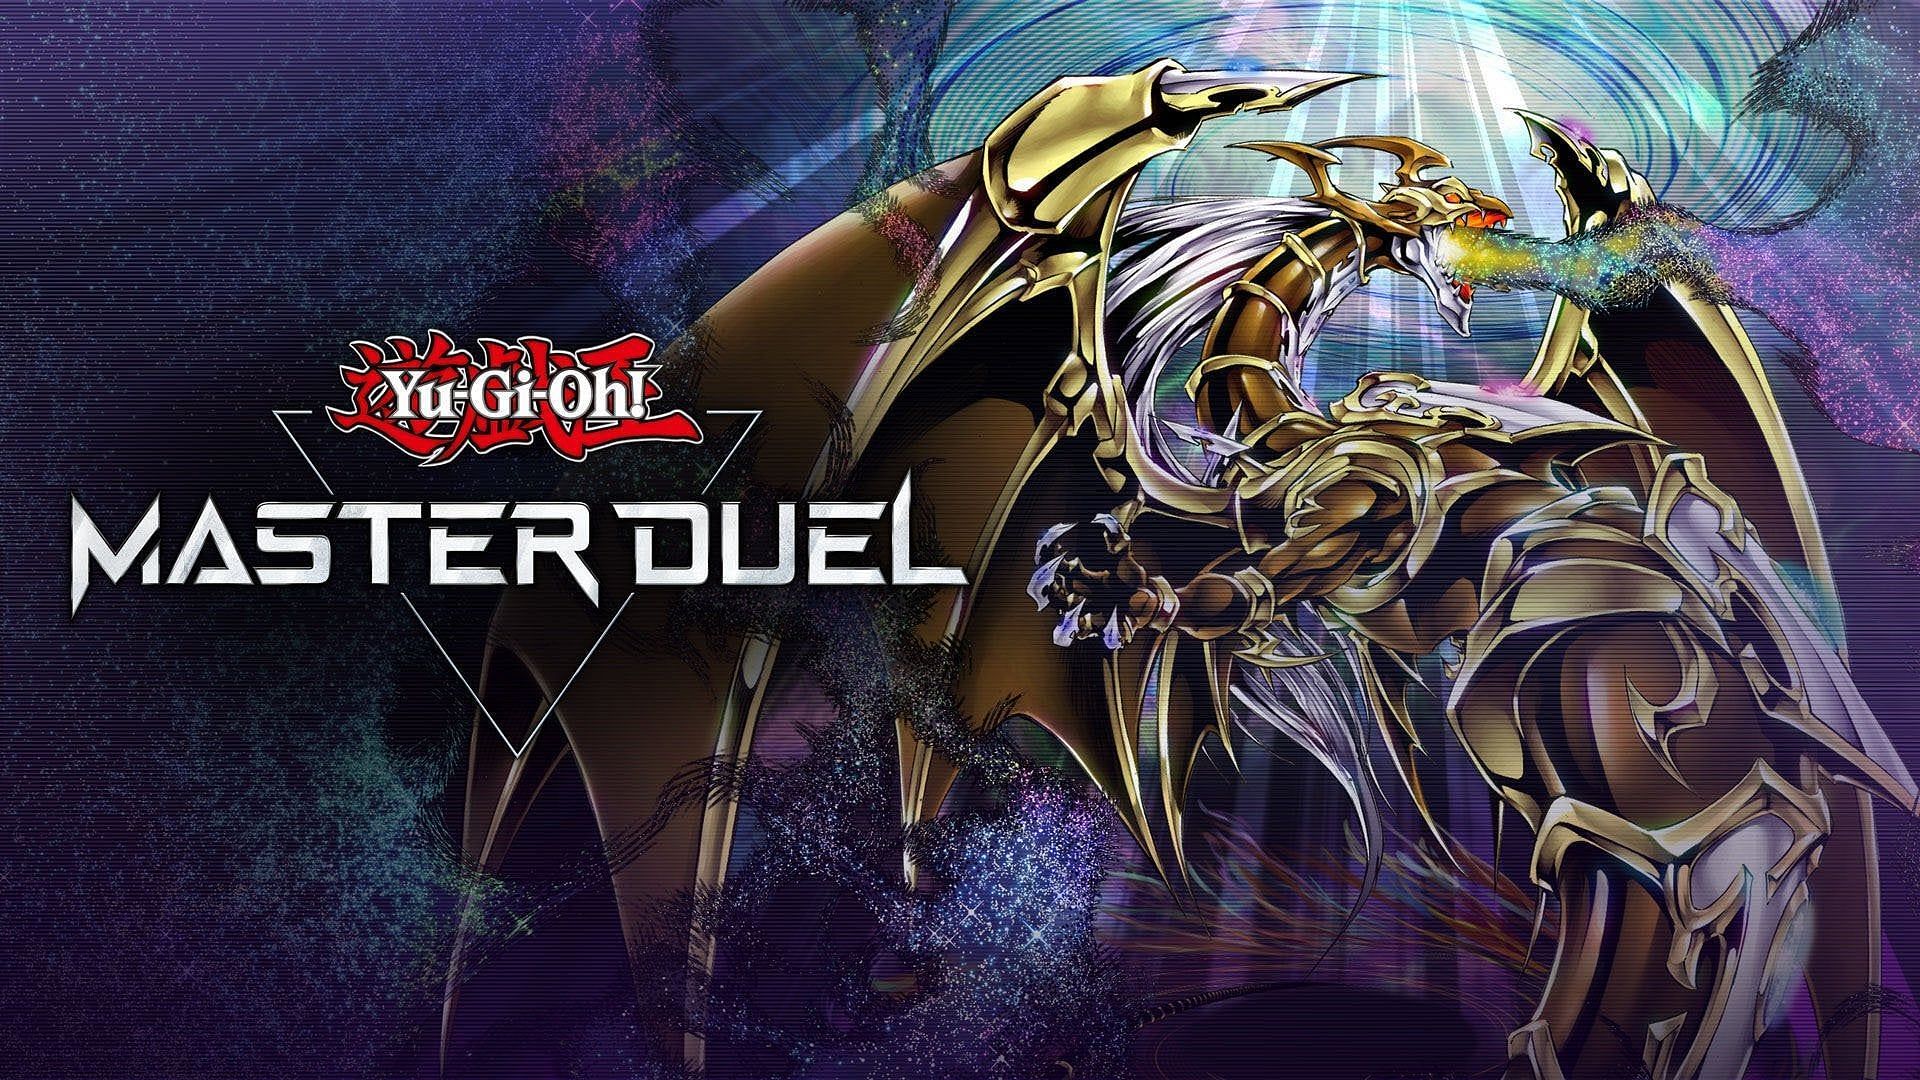 Yu-Gi-Oh! Master Duel has arrived, and crafting cards is an important aspect of the game (Image via Konami)